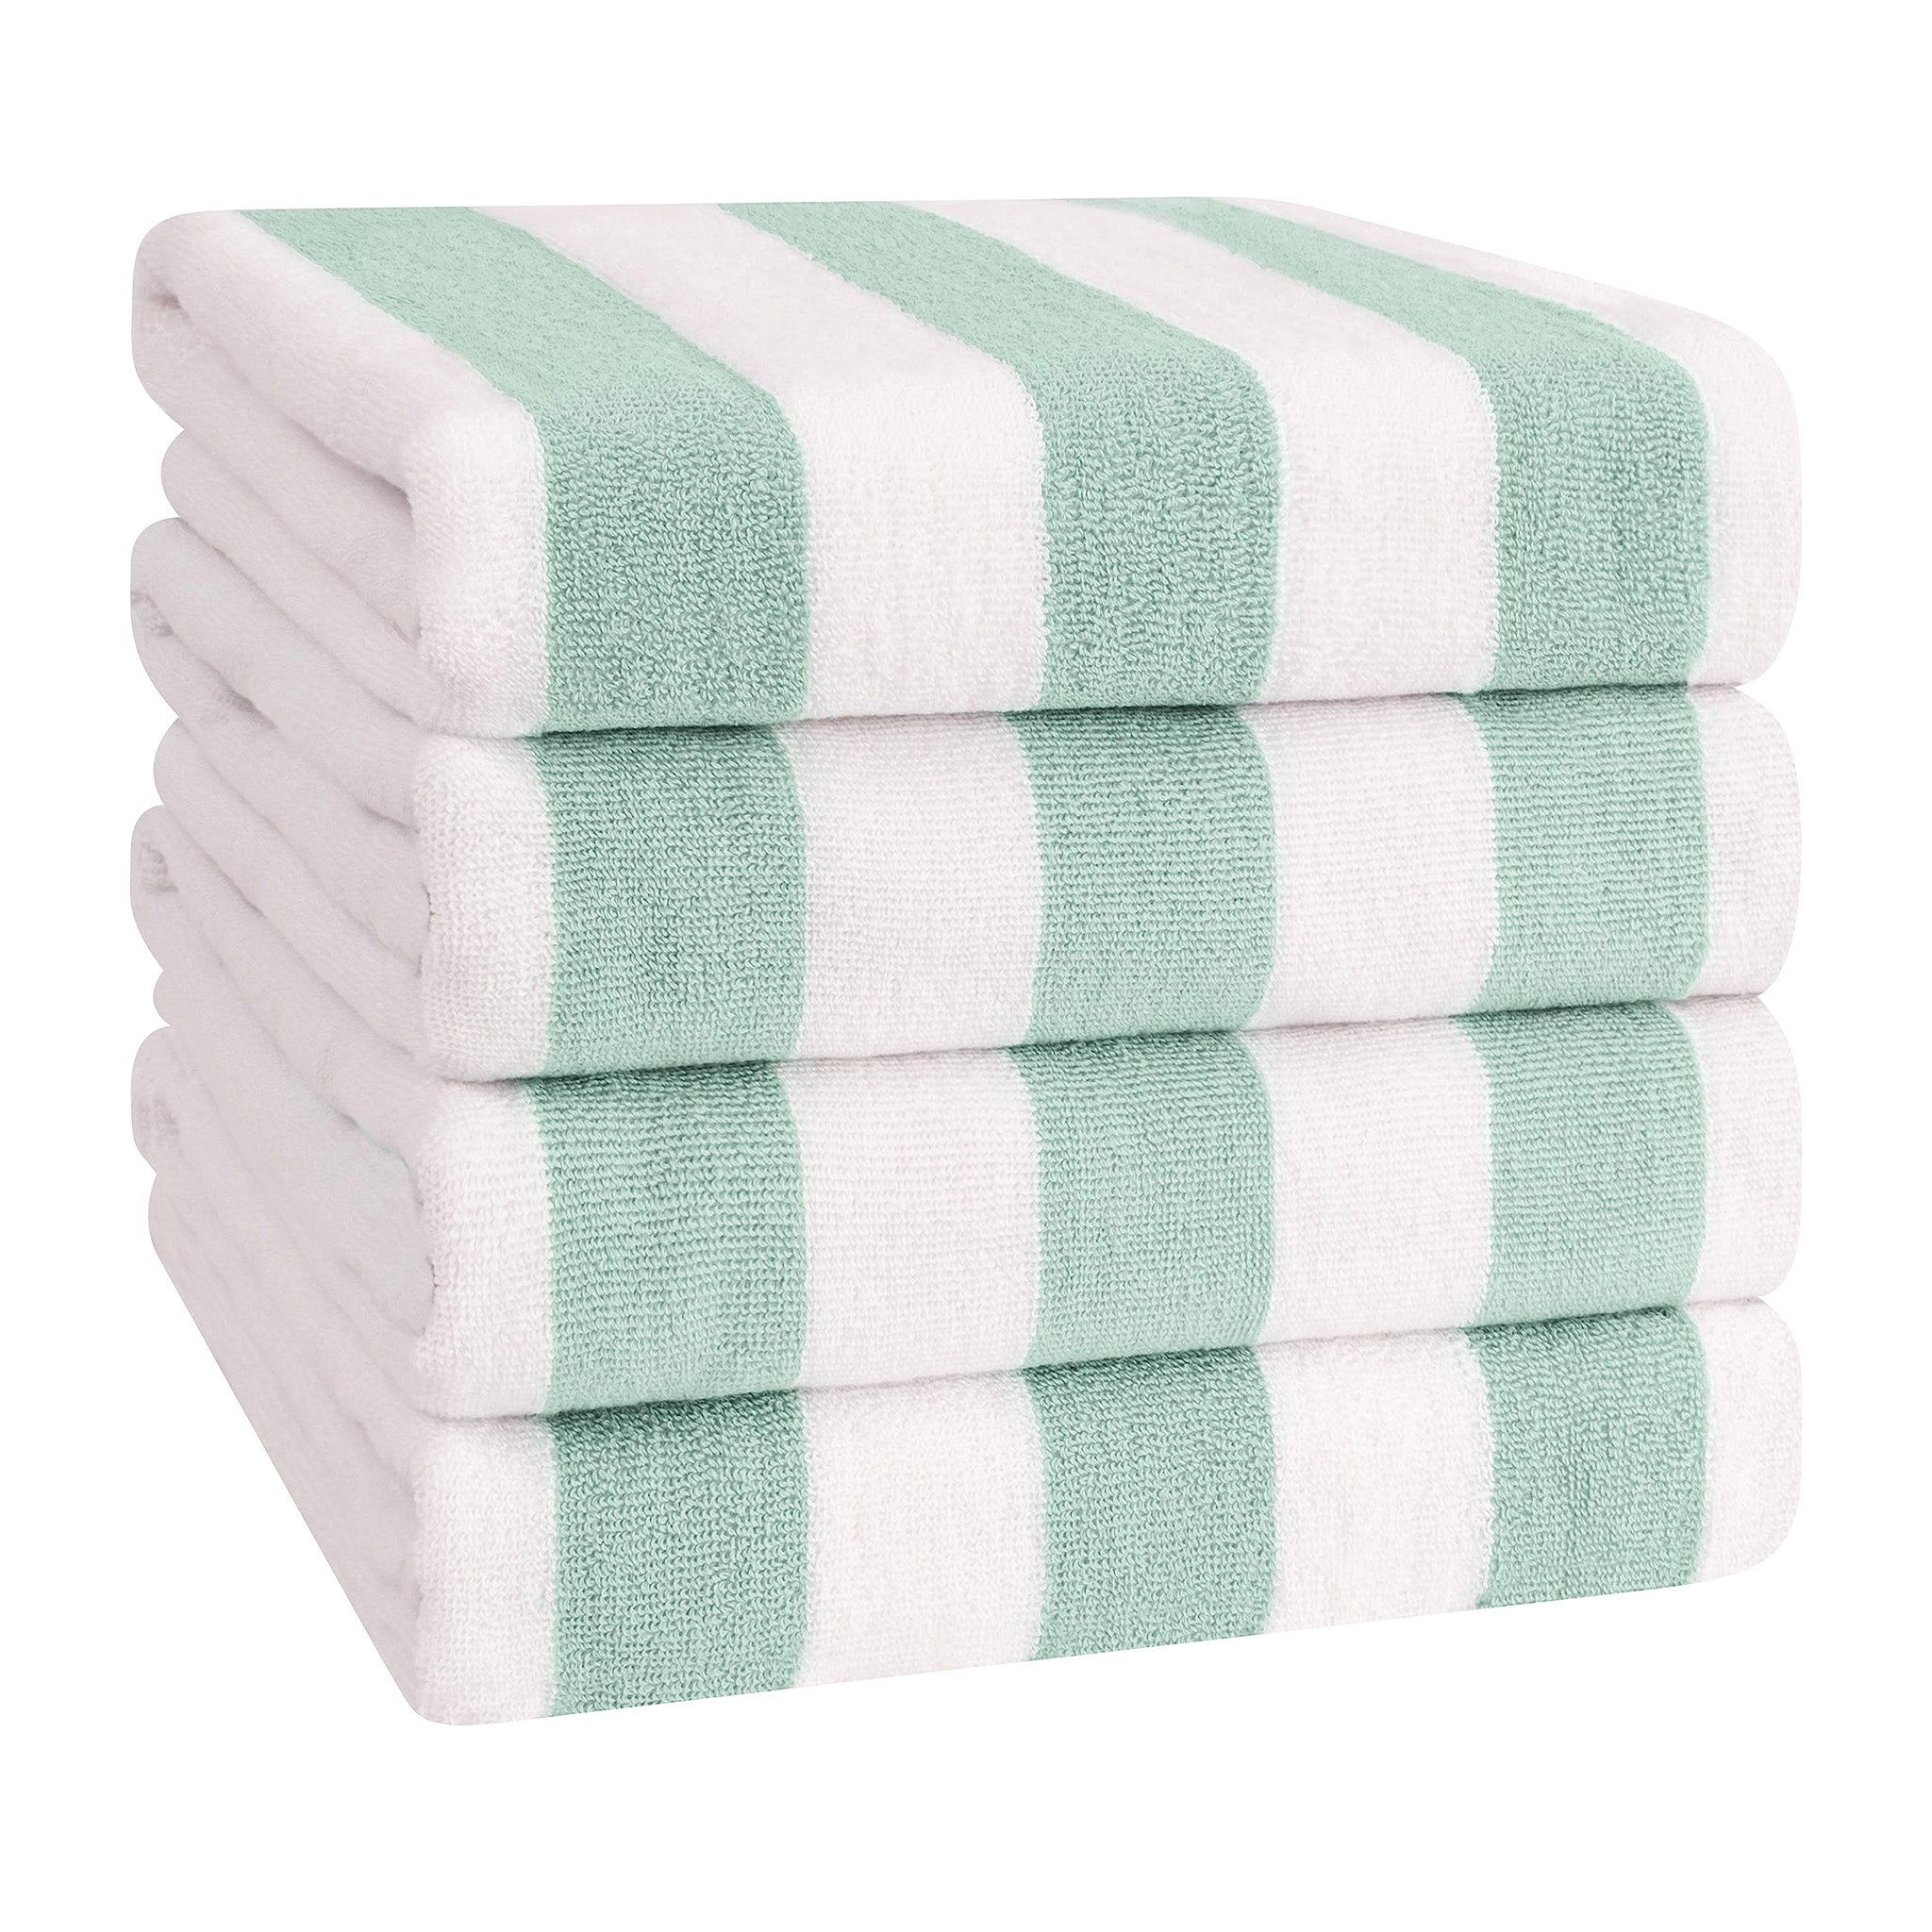 American Soft Linen Beach Towels, Cabana Striped 30x60 in., 100% Cotton, Pool Towel, Green